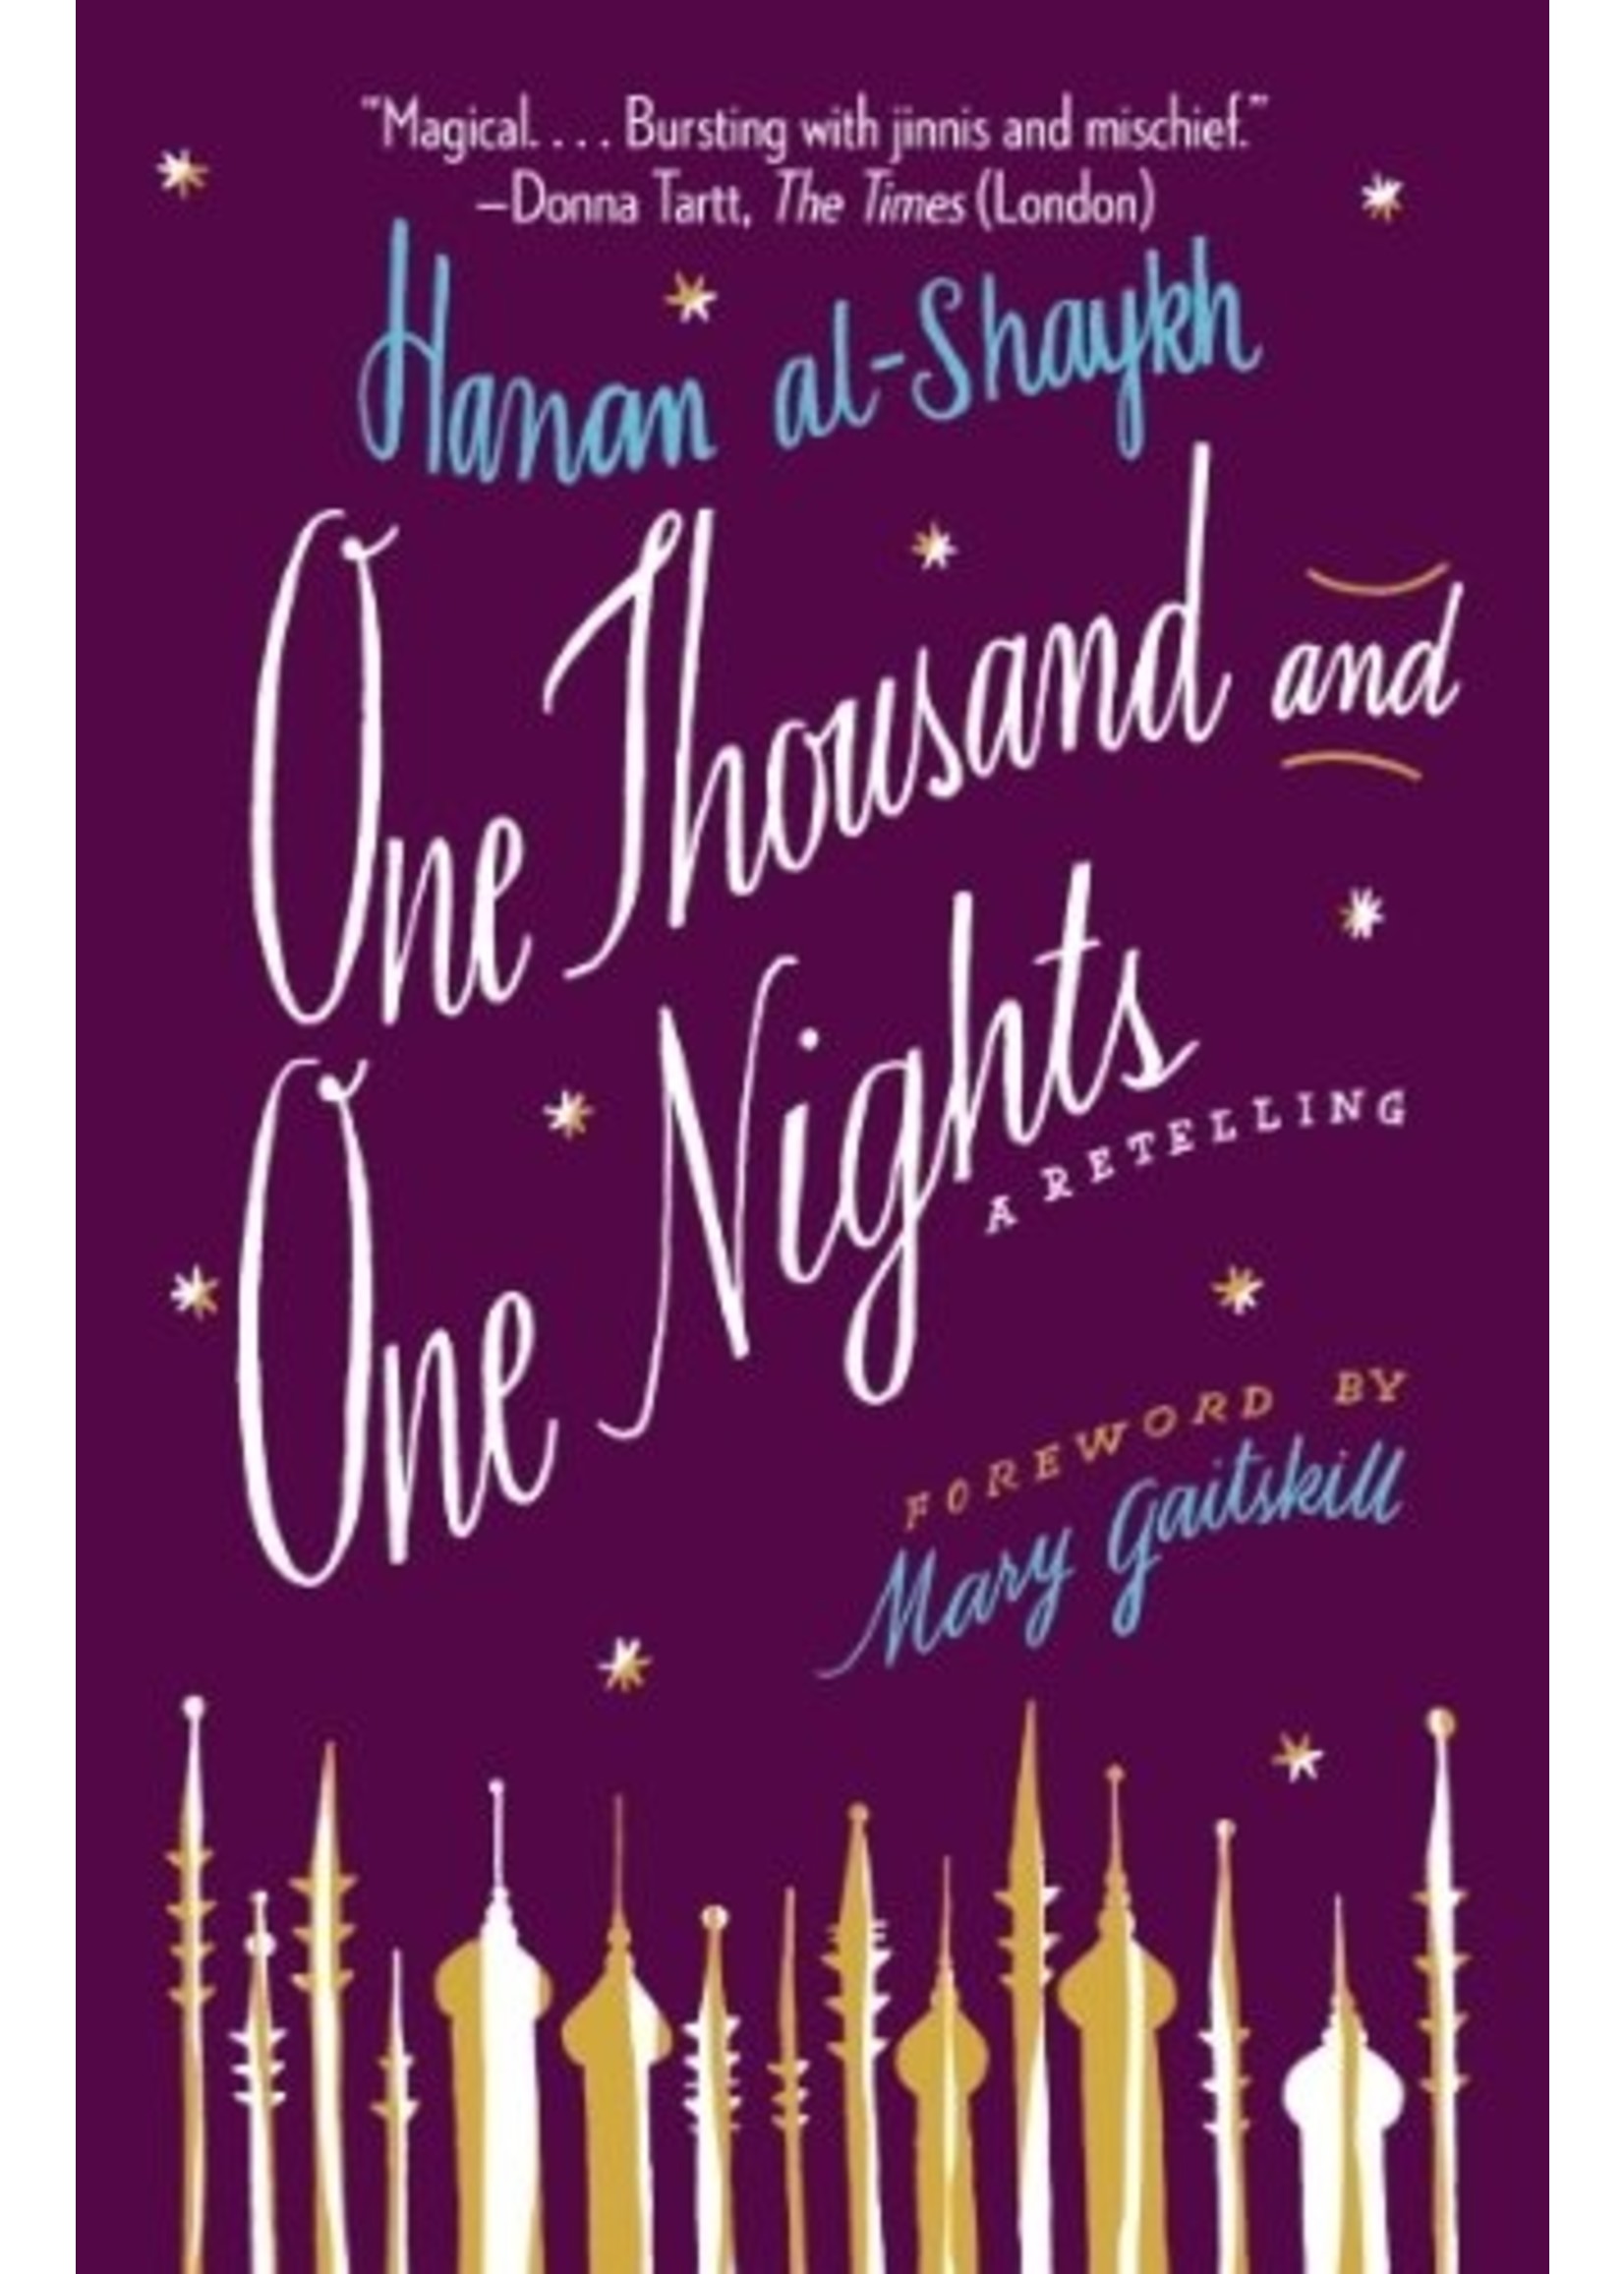 One Thousand and One Nights: A Retelling